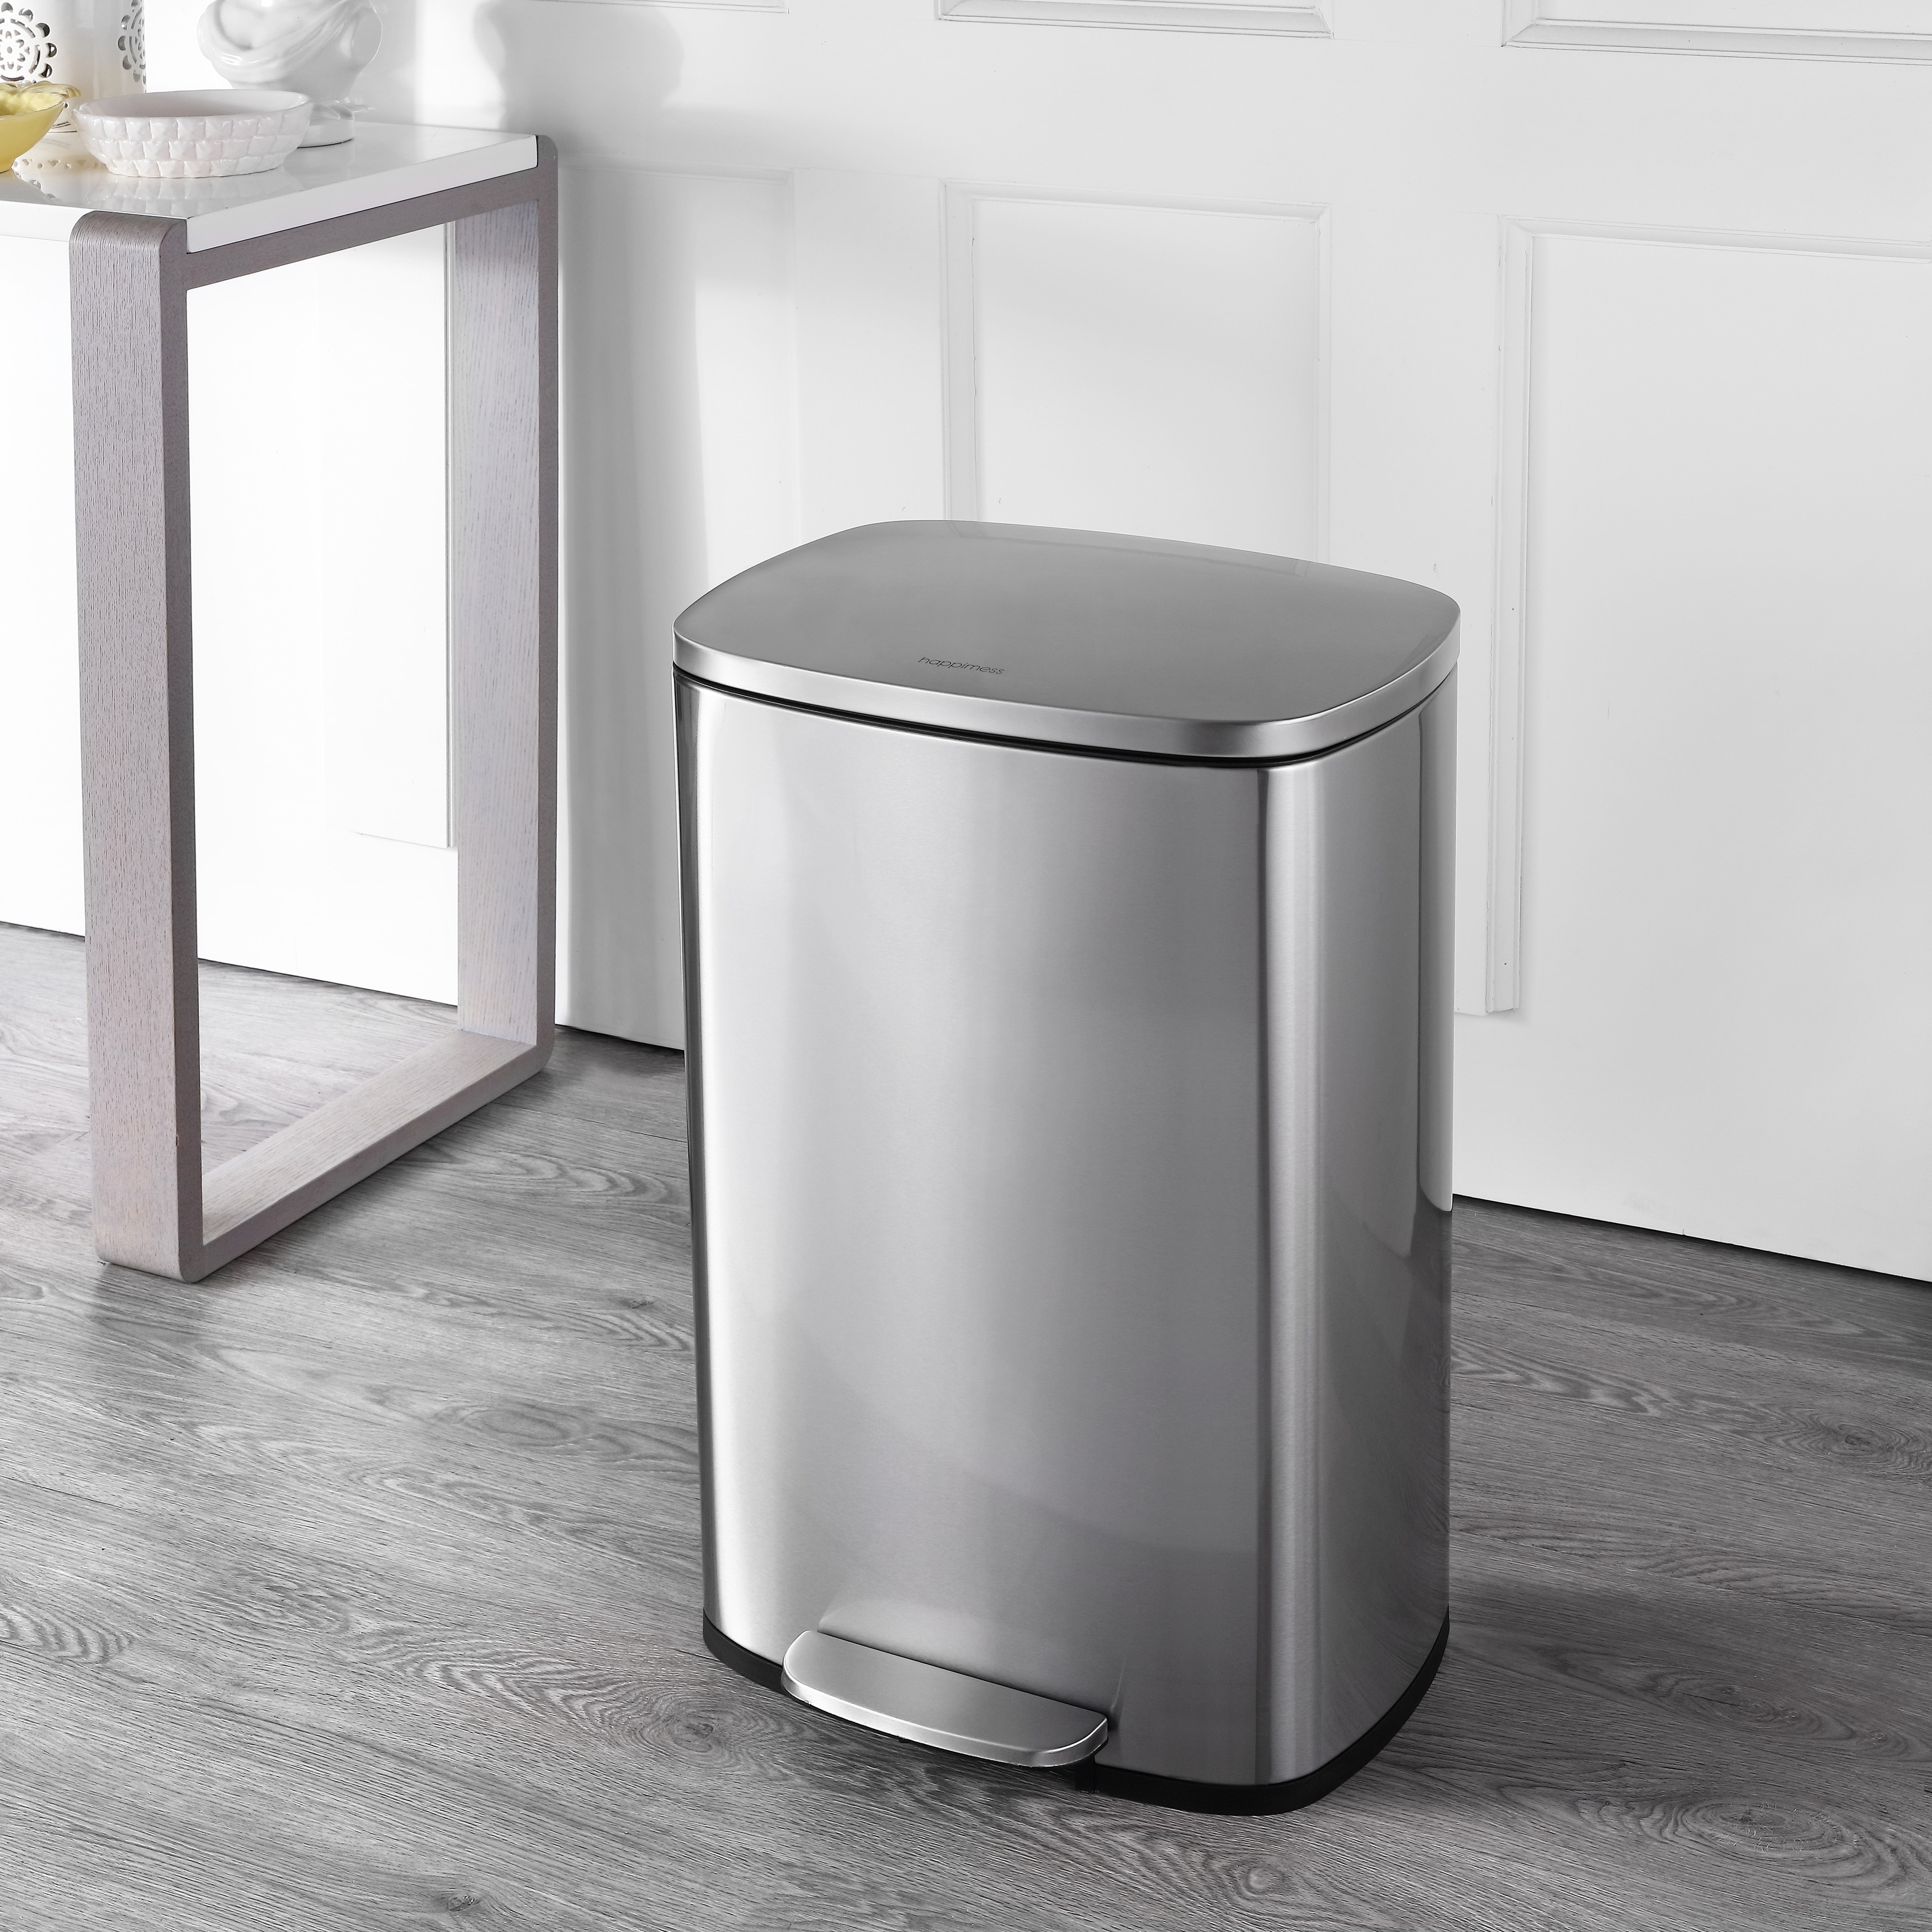 https://ak1.ostkcdn.com/images/products/is/images/direct/d211cad6ead39dabc3424375db1f727b2d094259/happimess-Connor-13-Gallon-Trash-Can-with-Soft-Close-Lid-and-FREE-Mini-Trash-Can.jpg